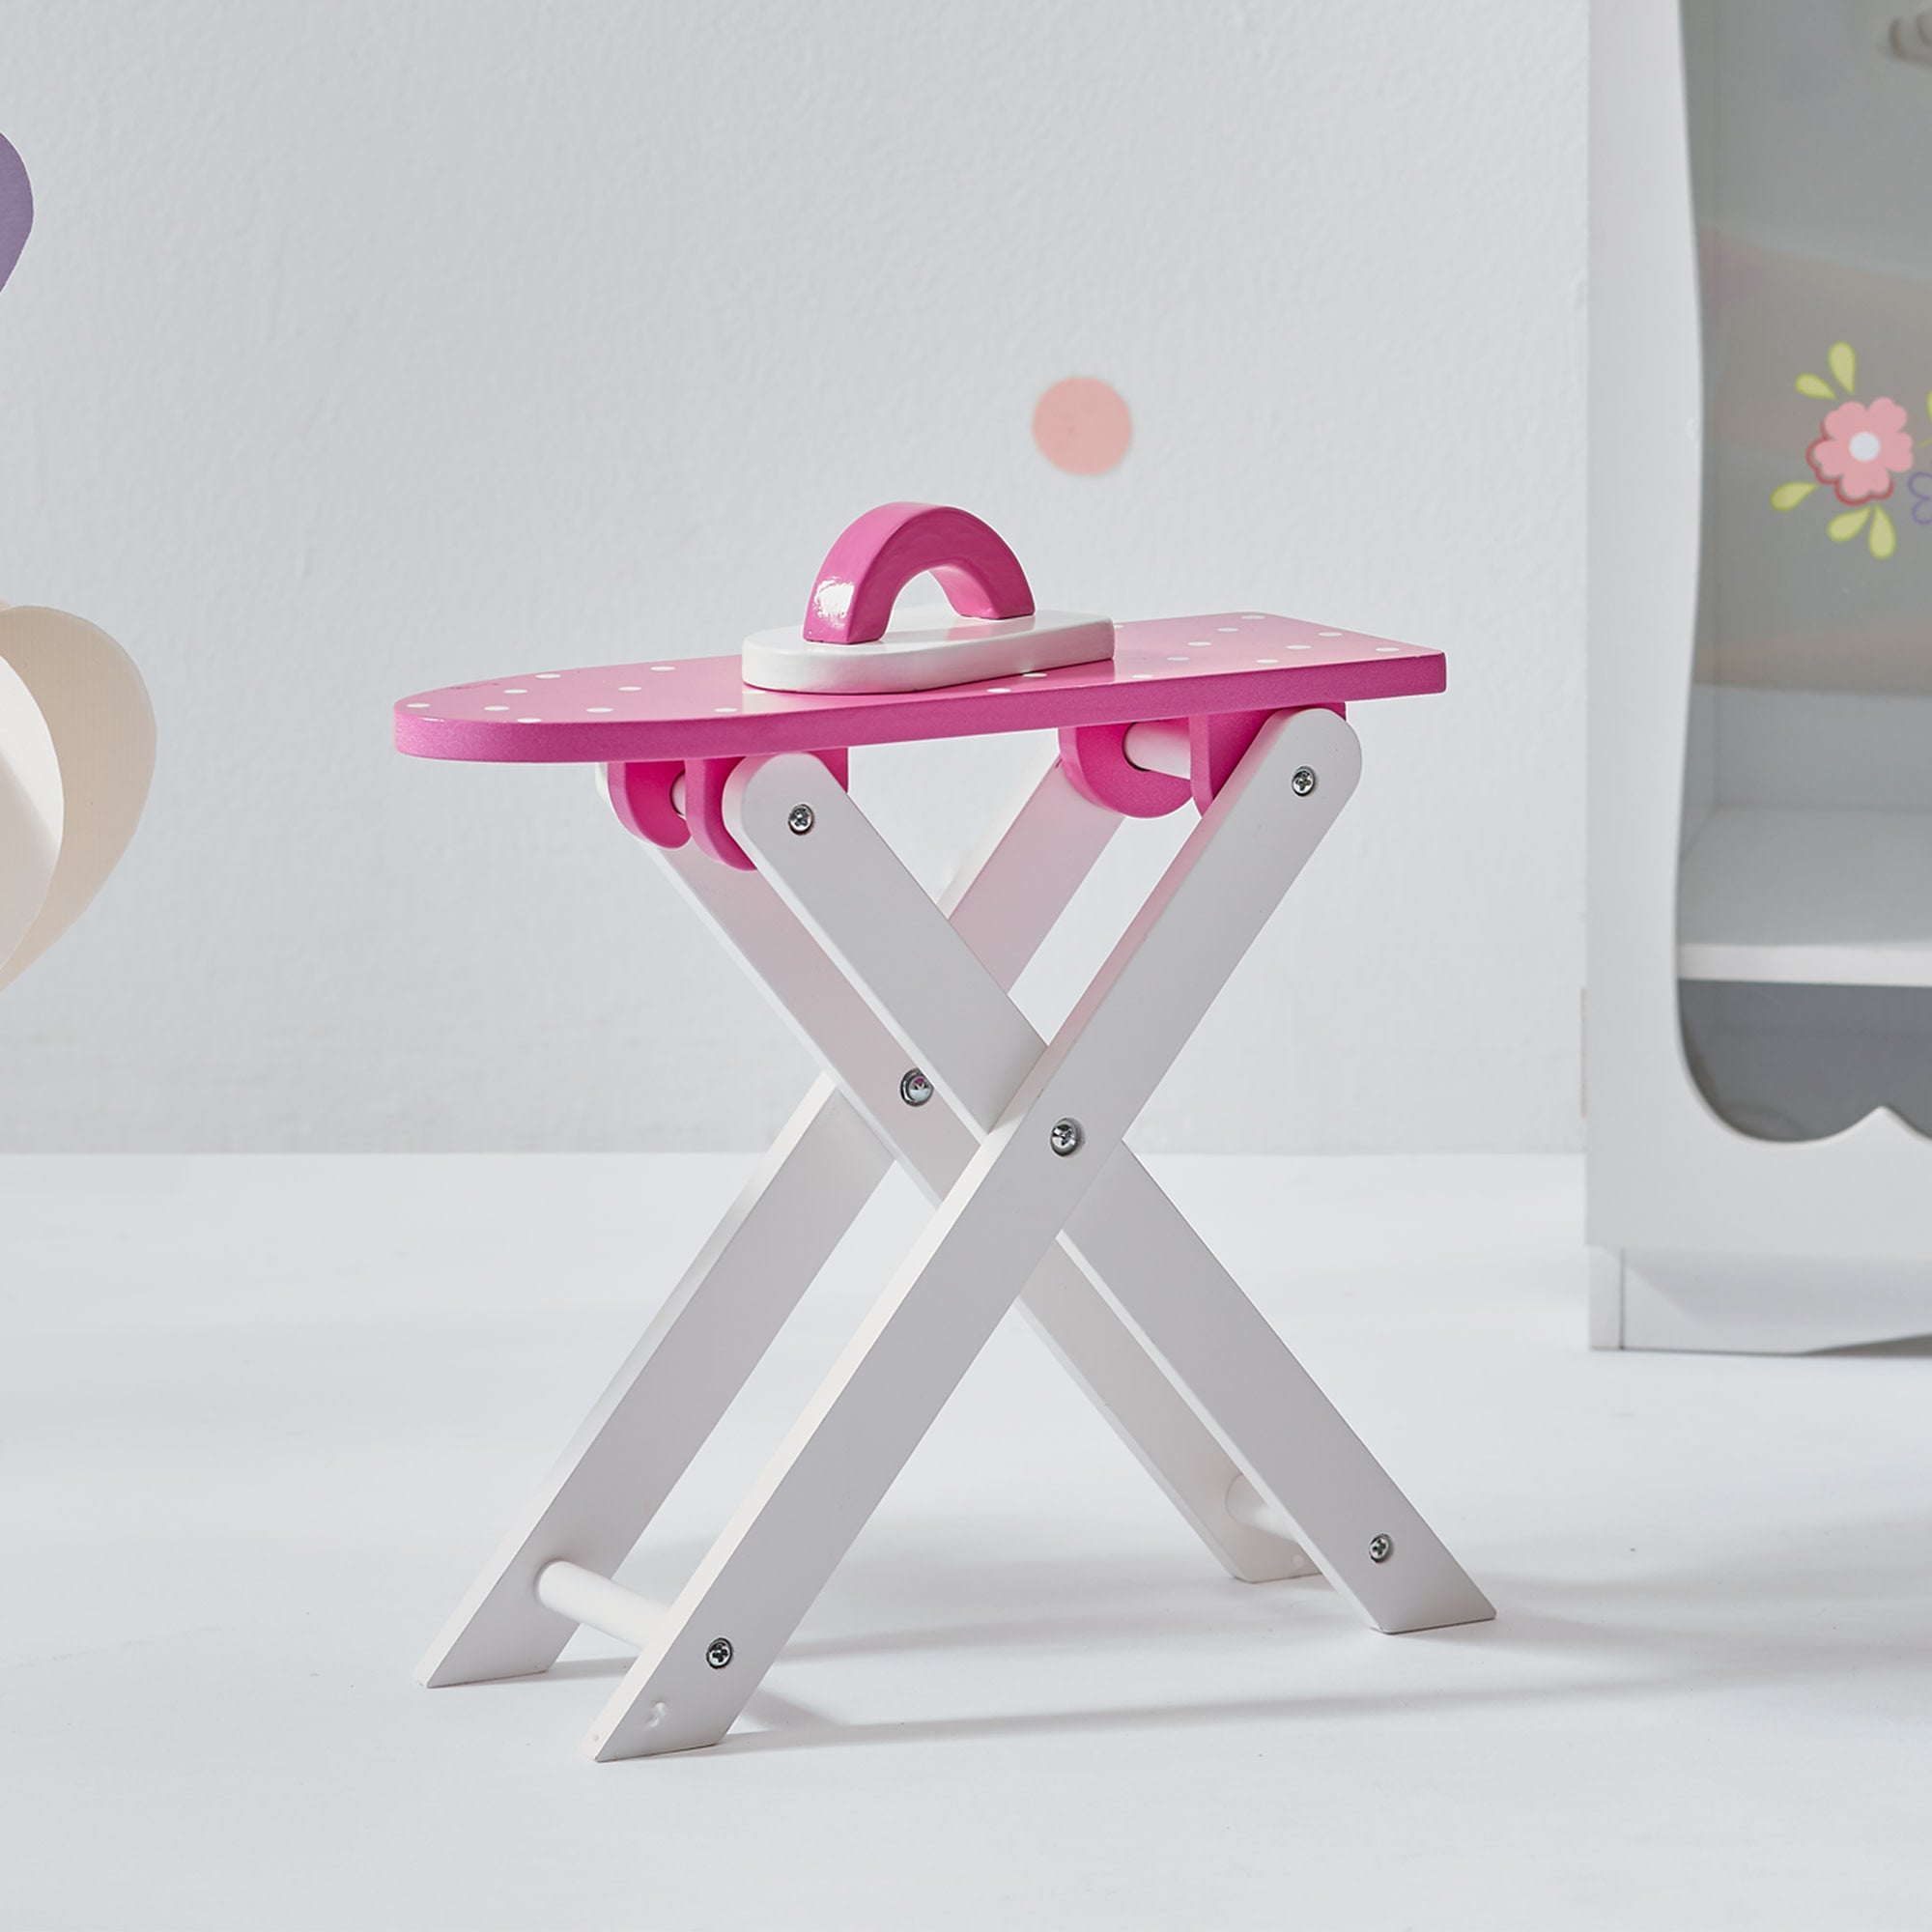 Olivia's Little World Little Princess Wooden Doll Ironing Board and Iron, Pink/White